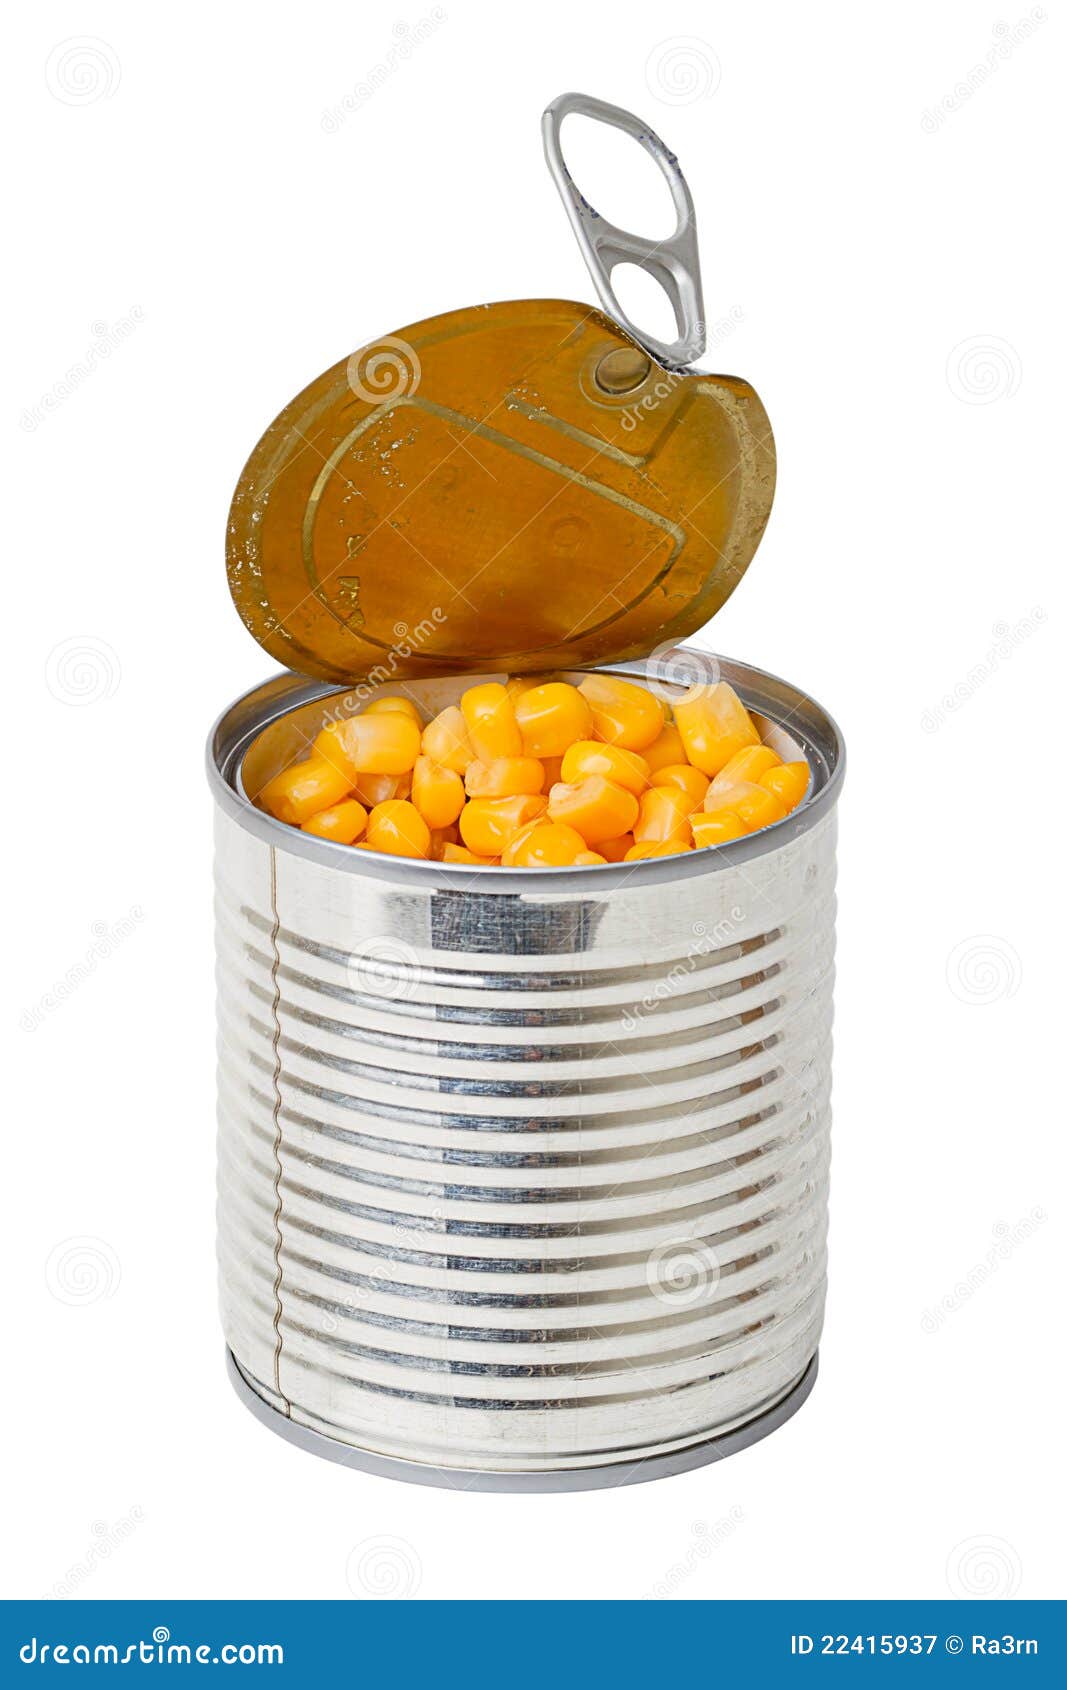 clipart canned vegetables - photo #34